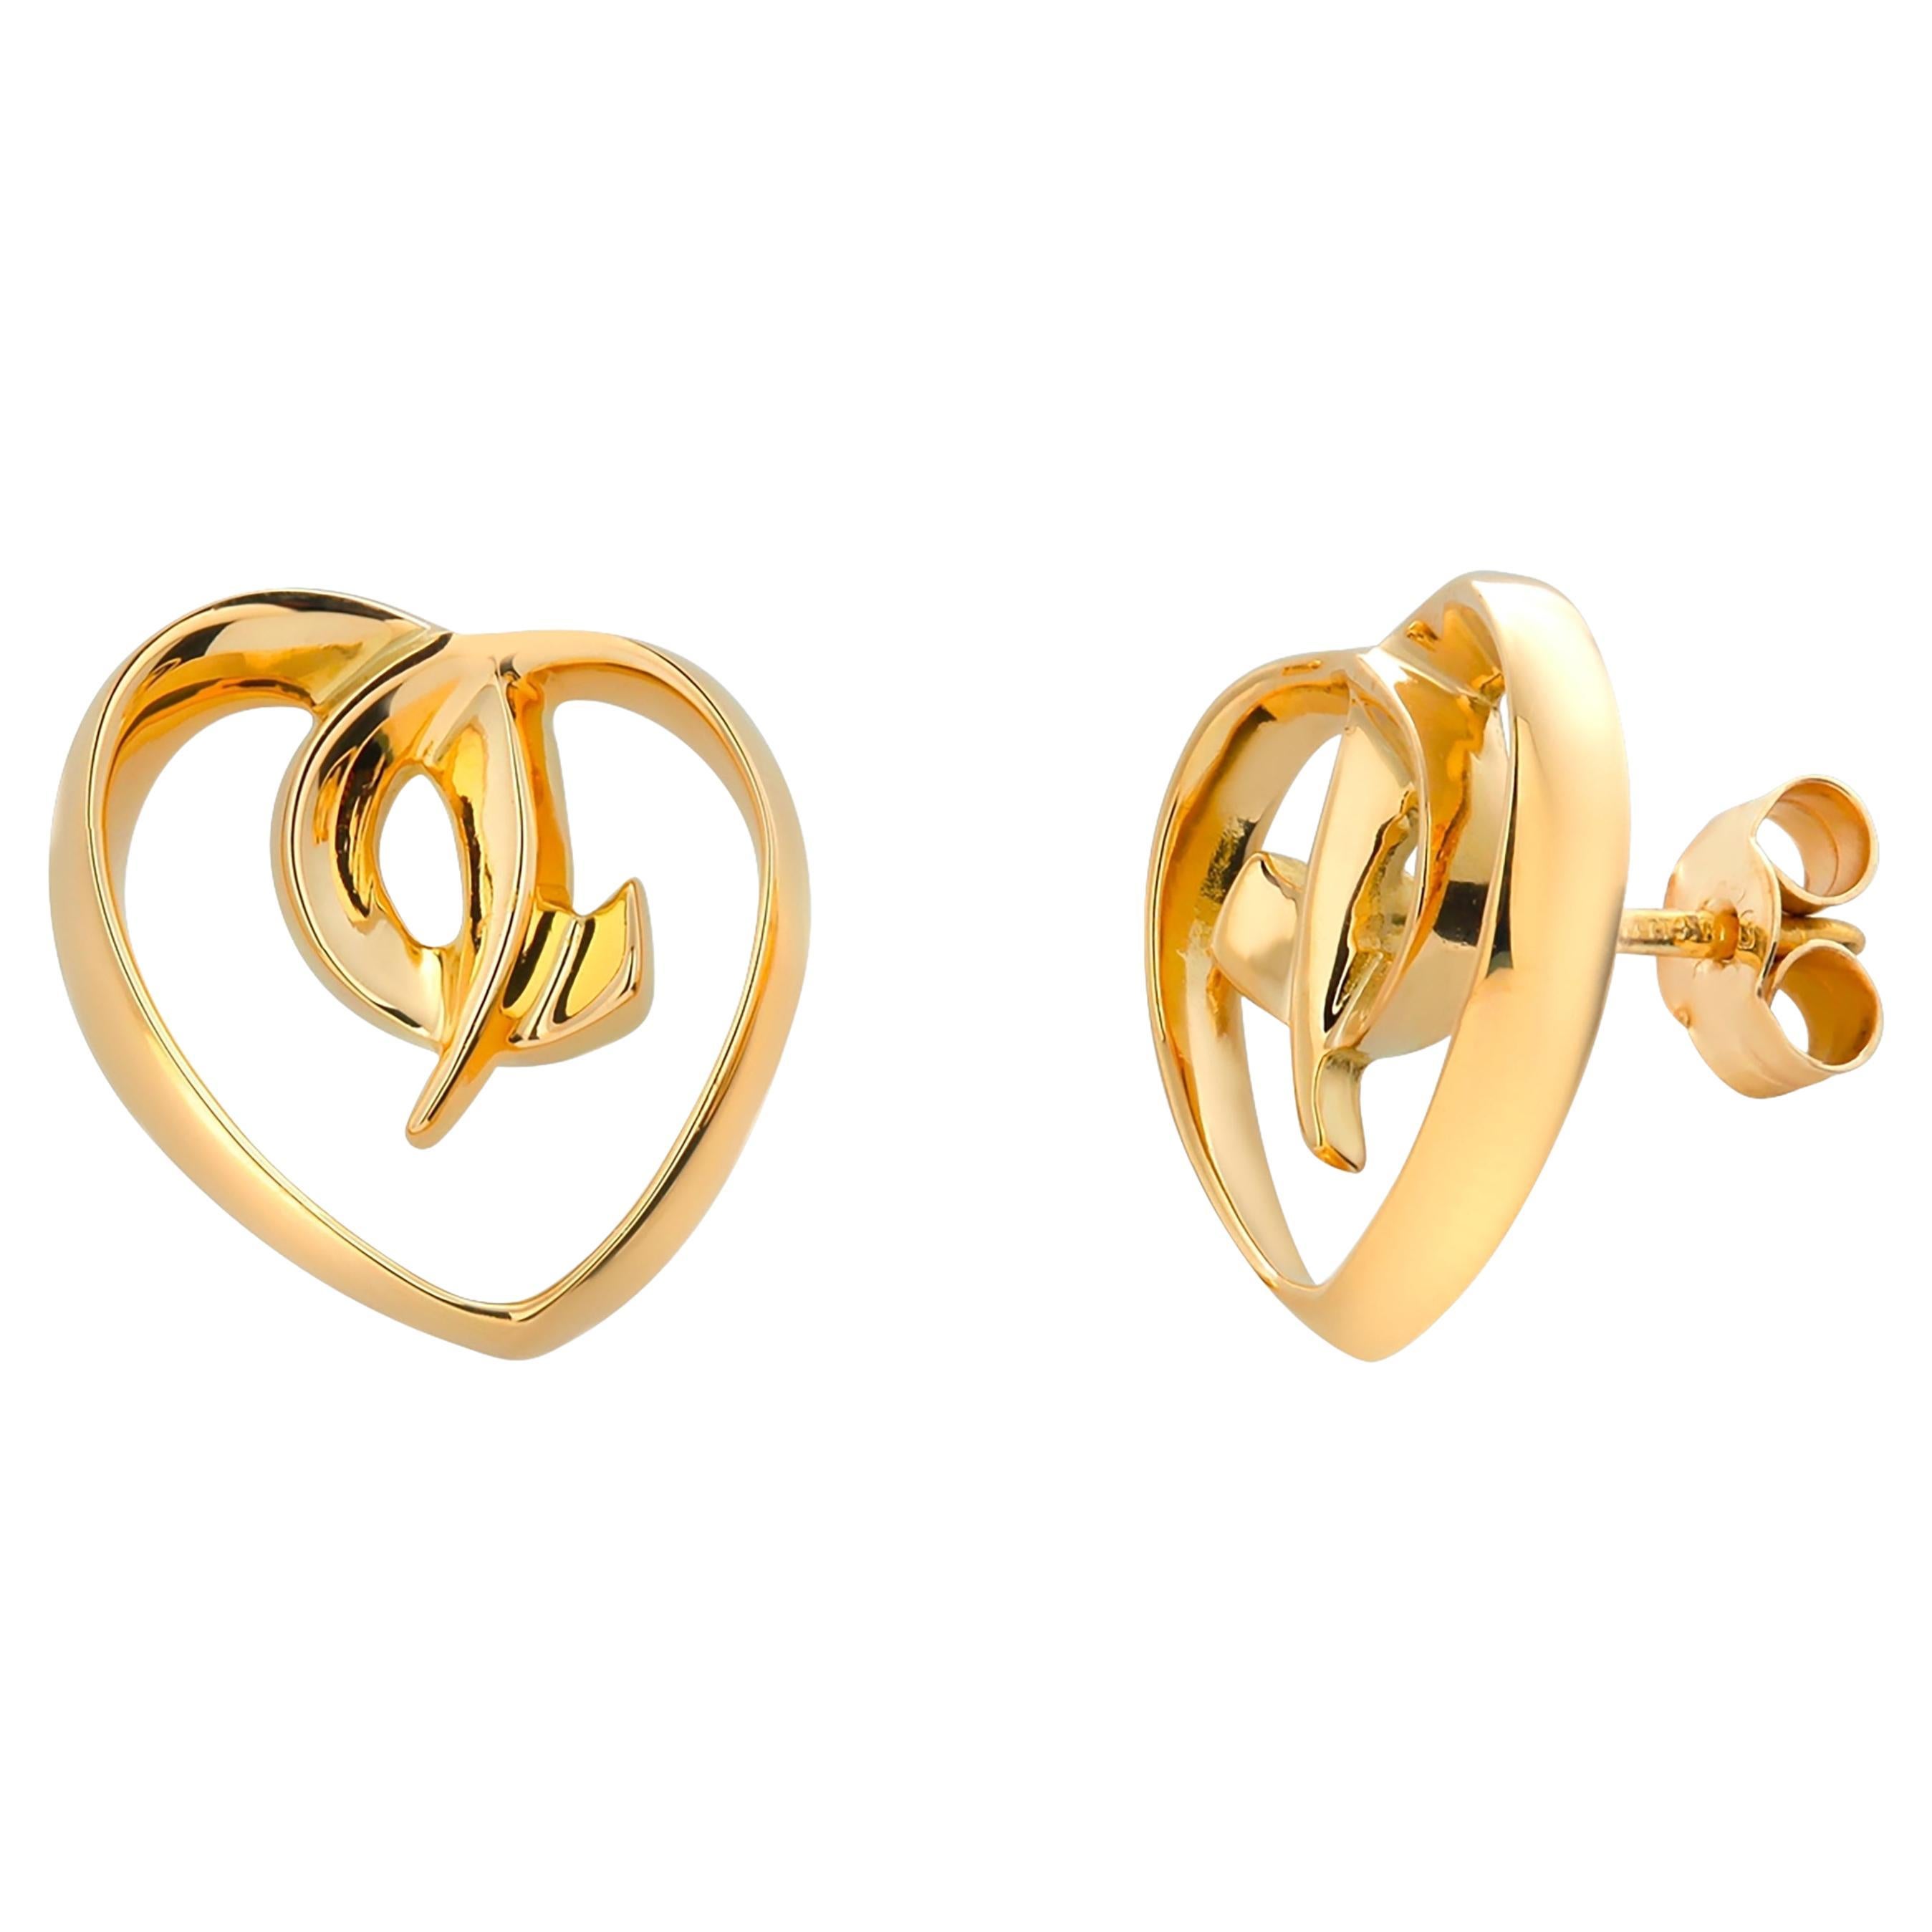 Paloma Picasso Collection Earrings